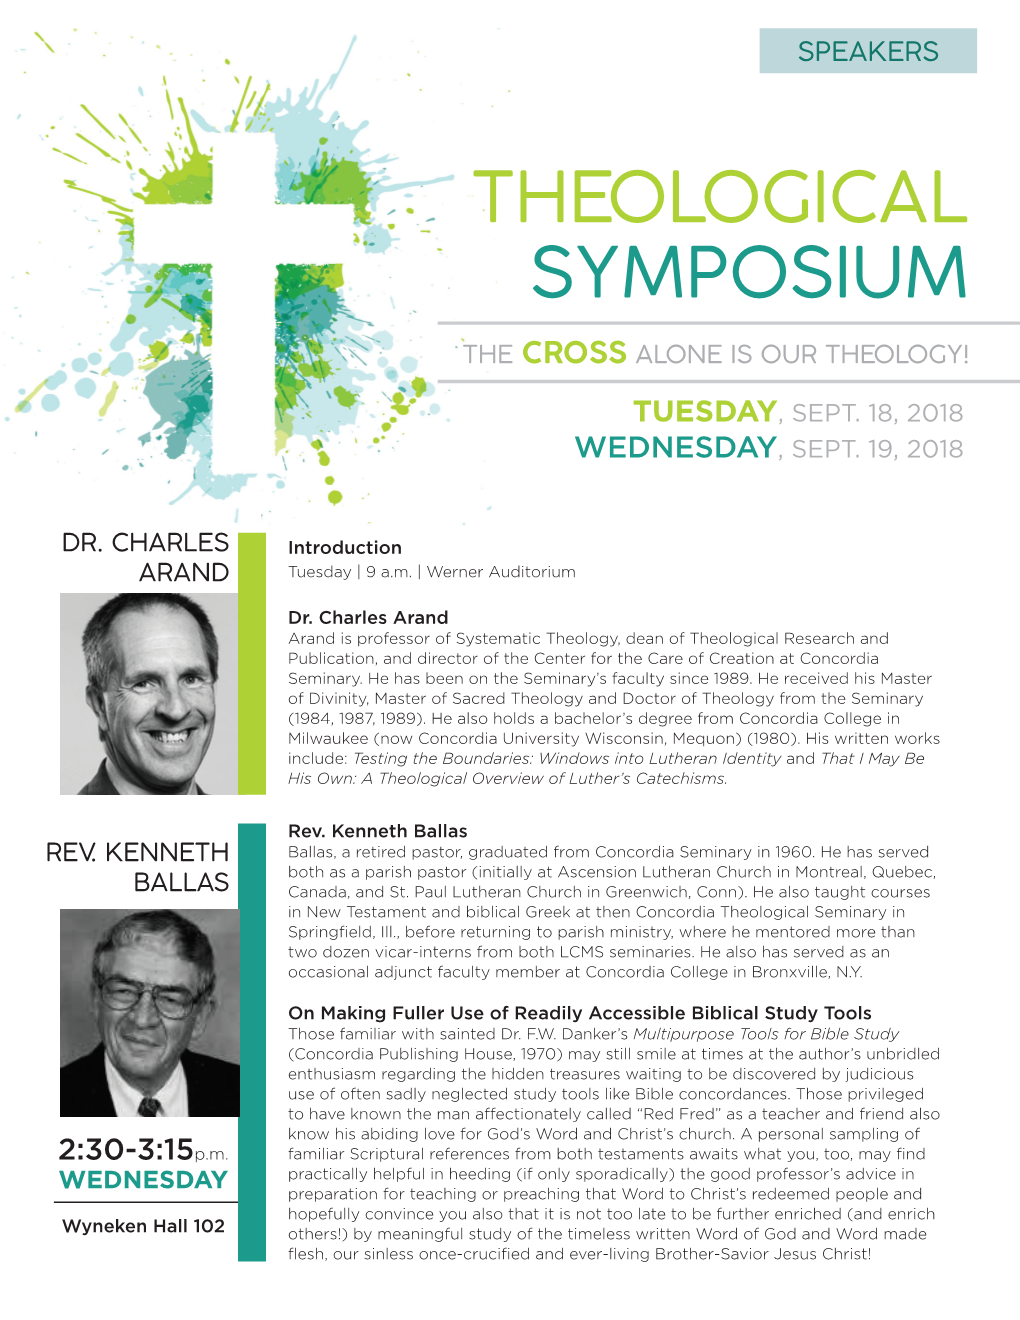 Theological Symposium the Cross Alone Is Our Theology! Tuesday, Sept